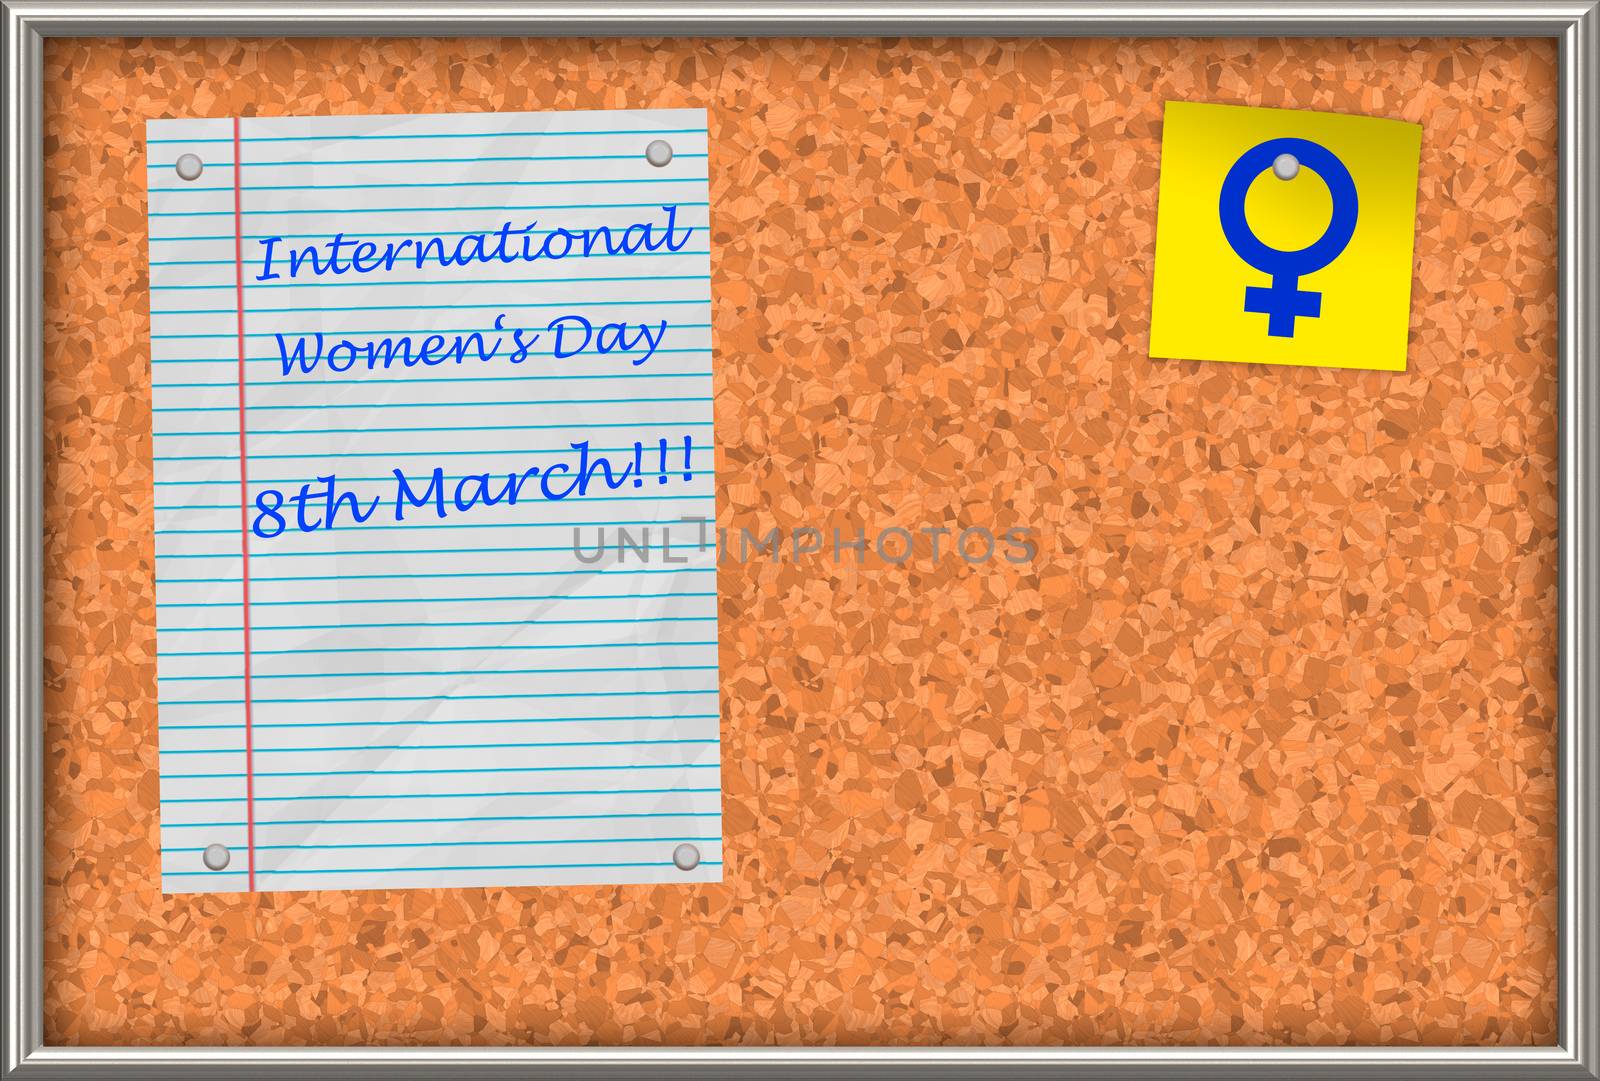 Illustration of a cork board with a notpad and text International Women's Day 8th March!!! and a women's sign and free space